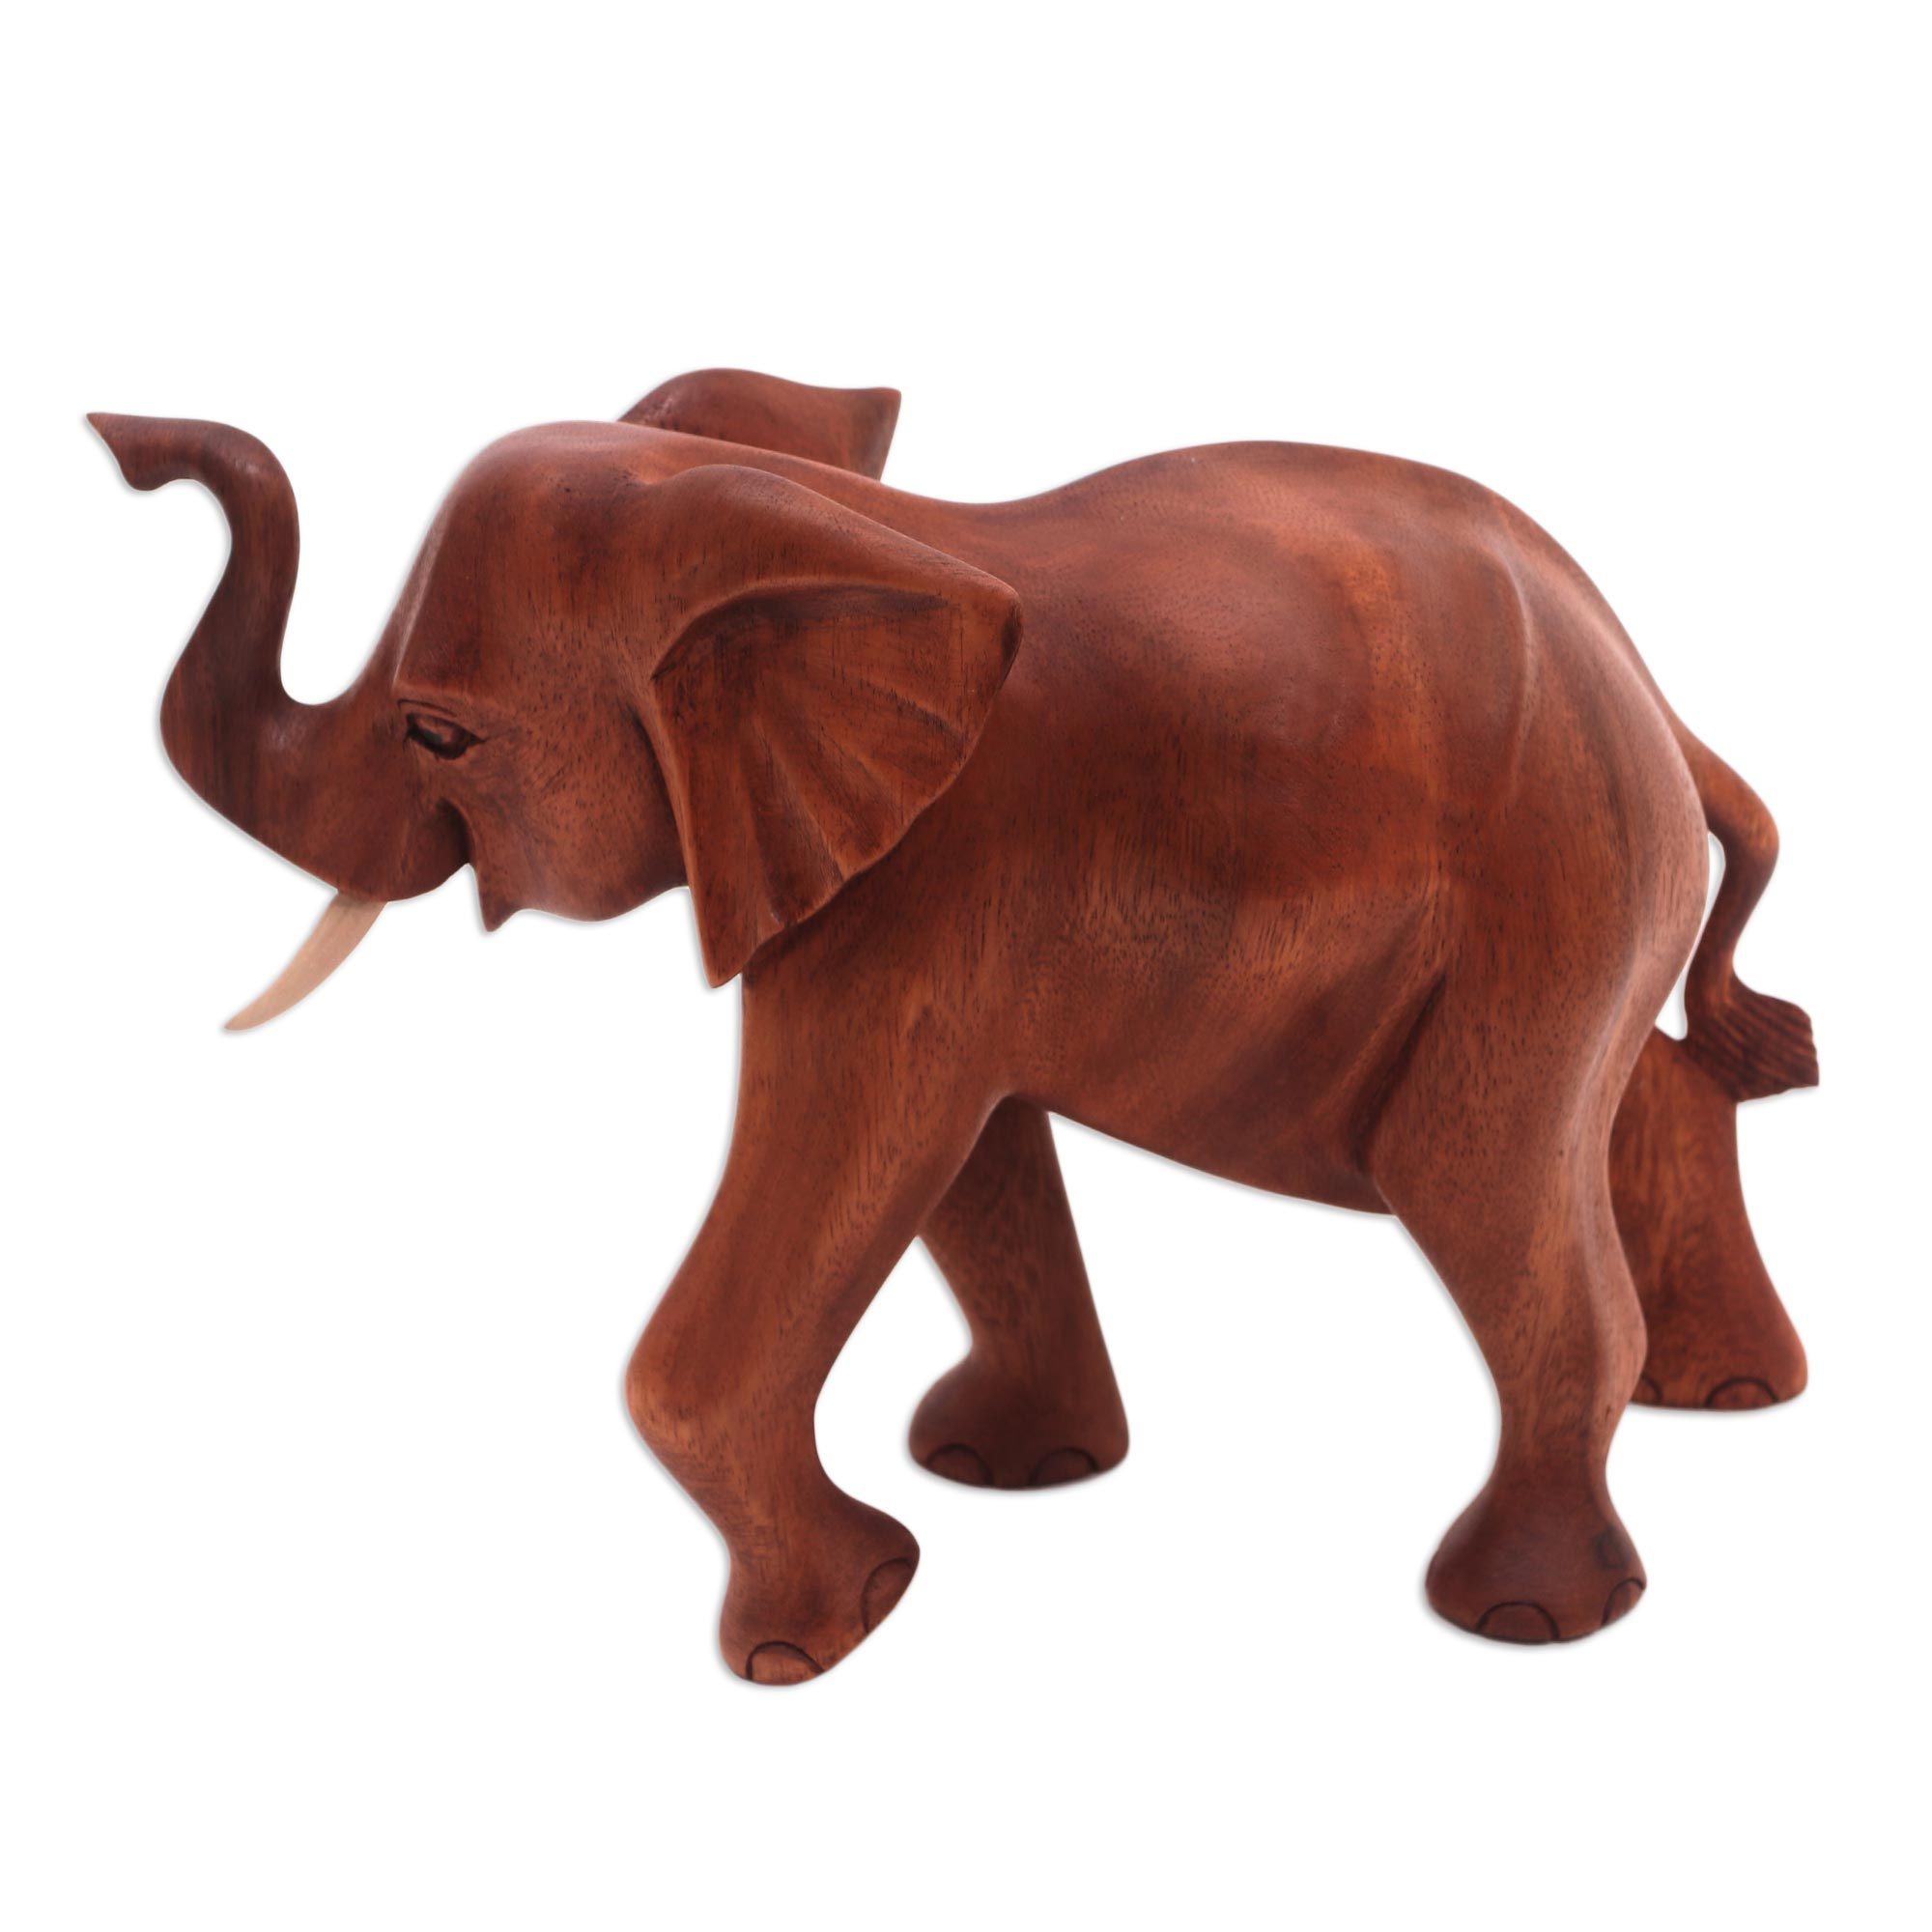 Unicef Market Wood Sculpture Carved In Indonesia Elephant Trot